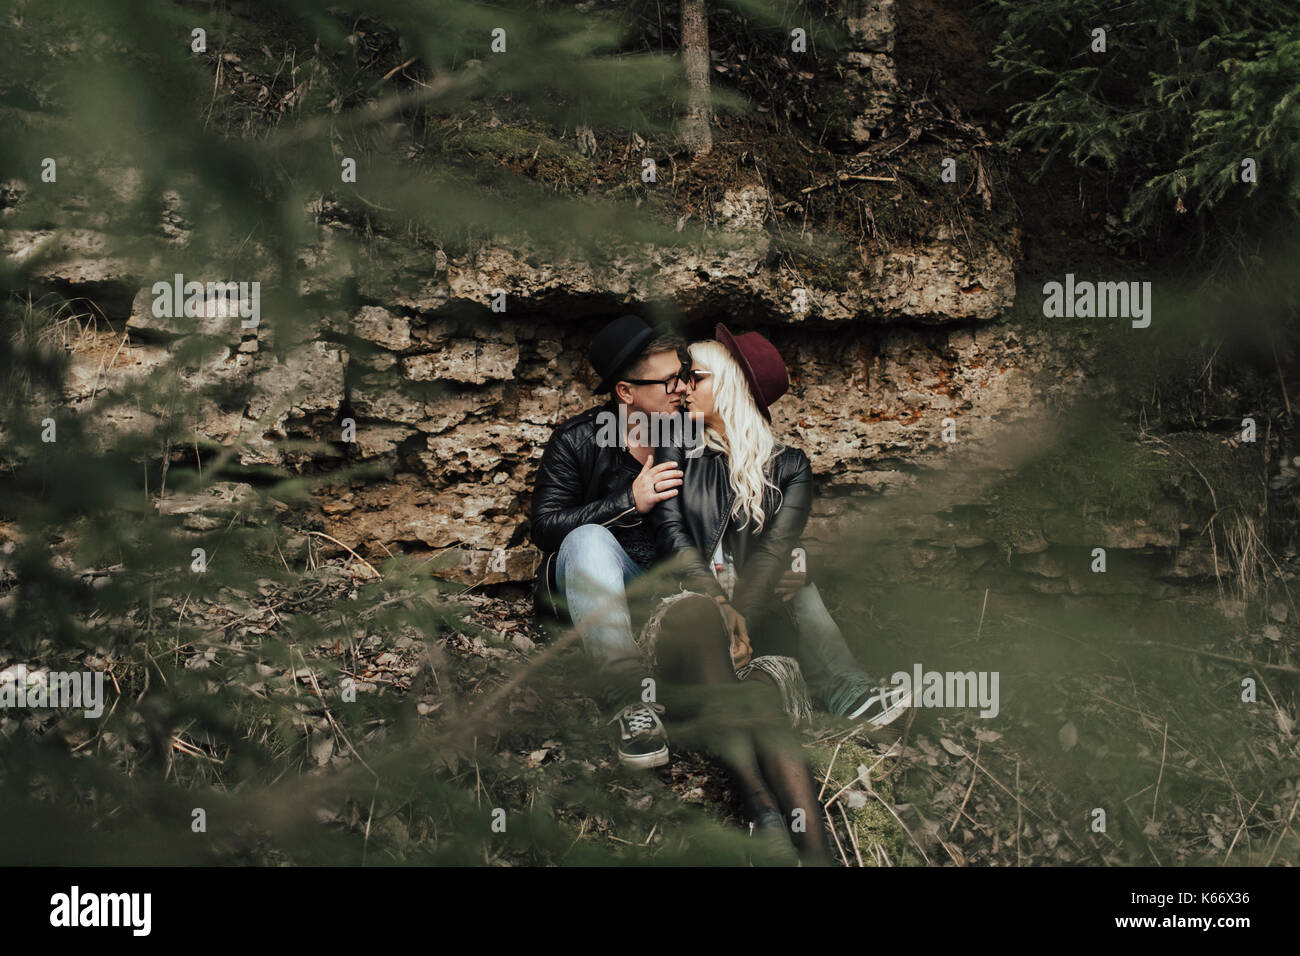 Affectionate Middle Eastern couple kissing near rocks Stock Photo